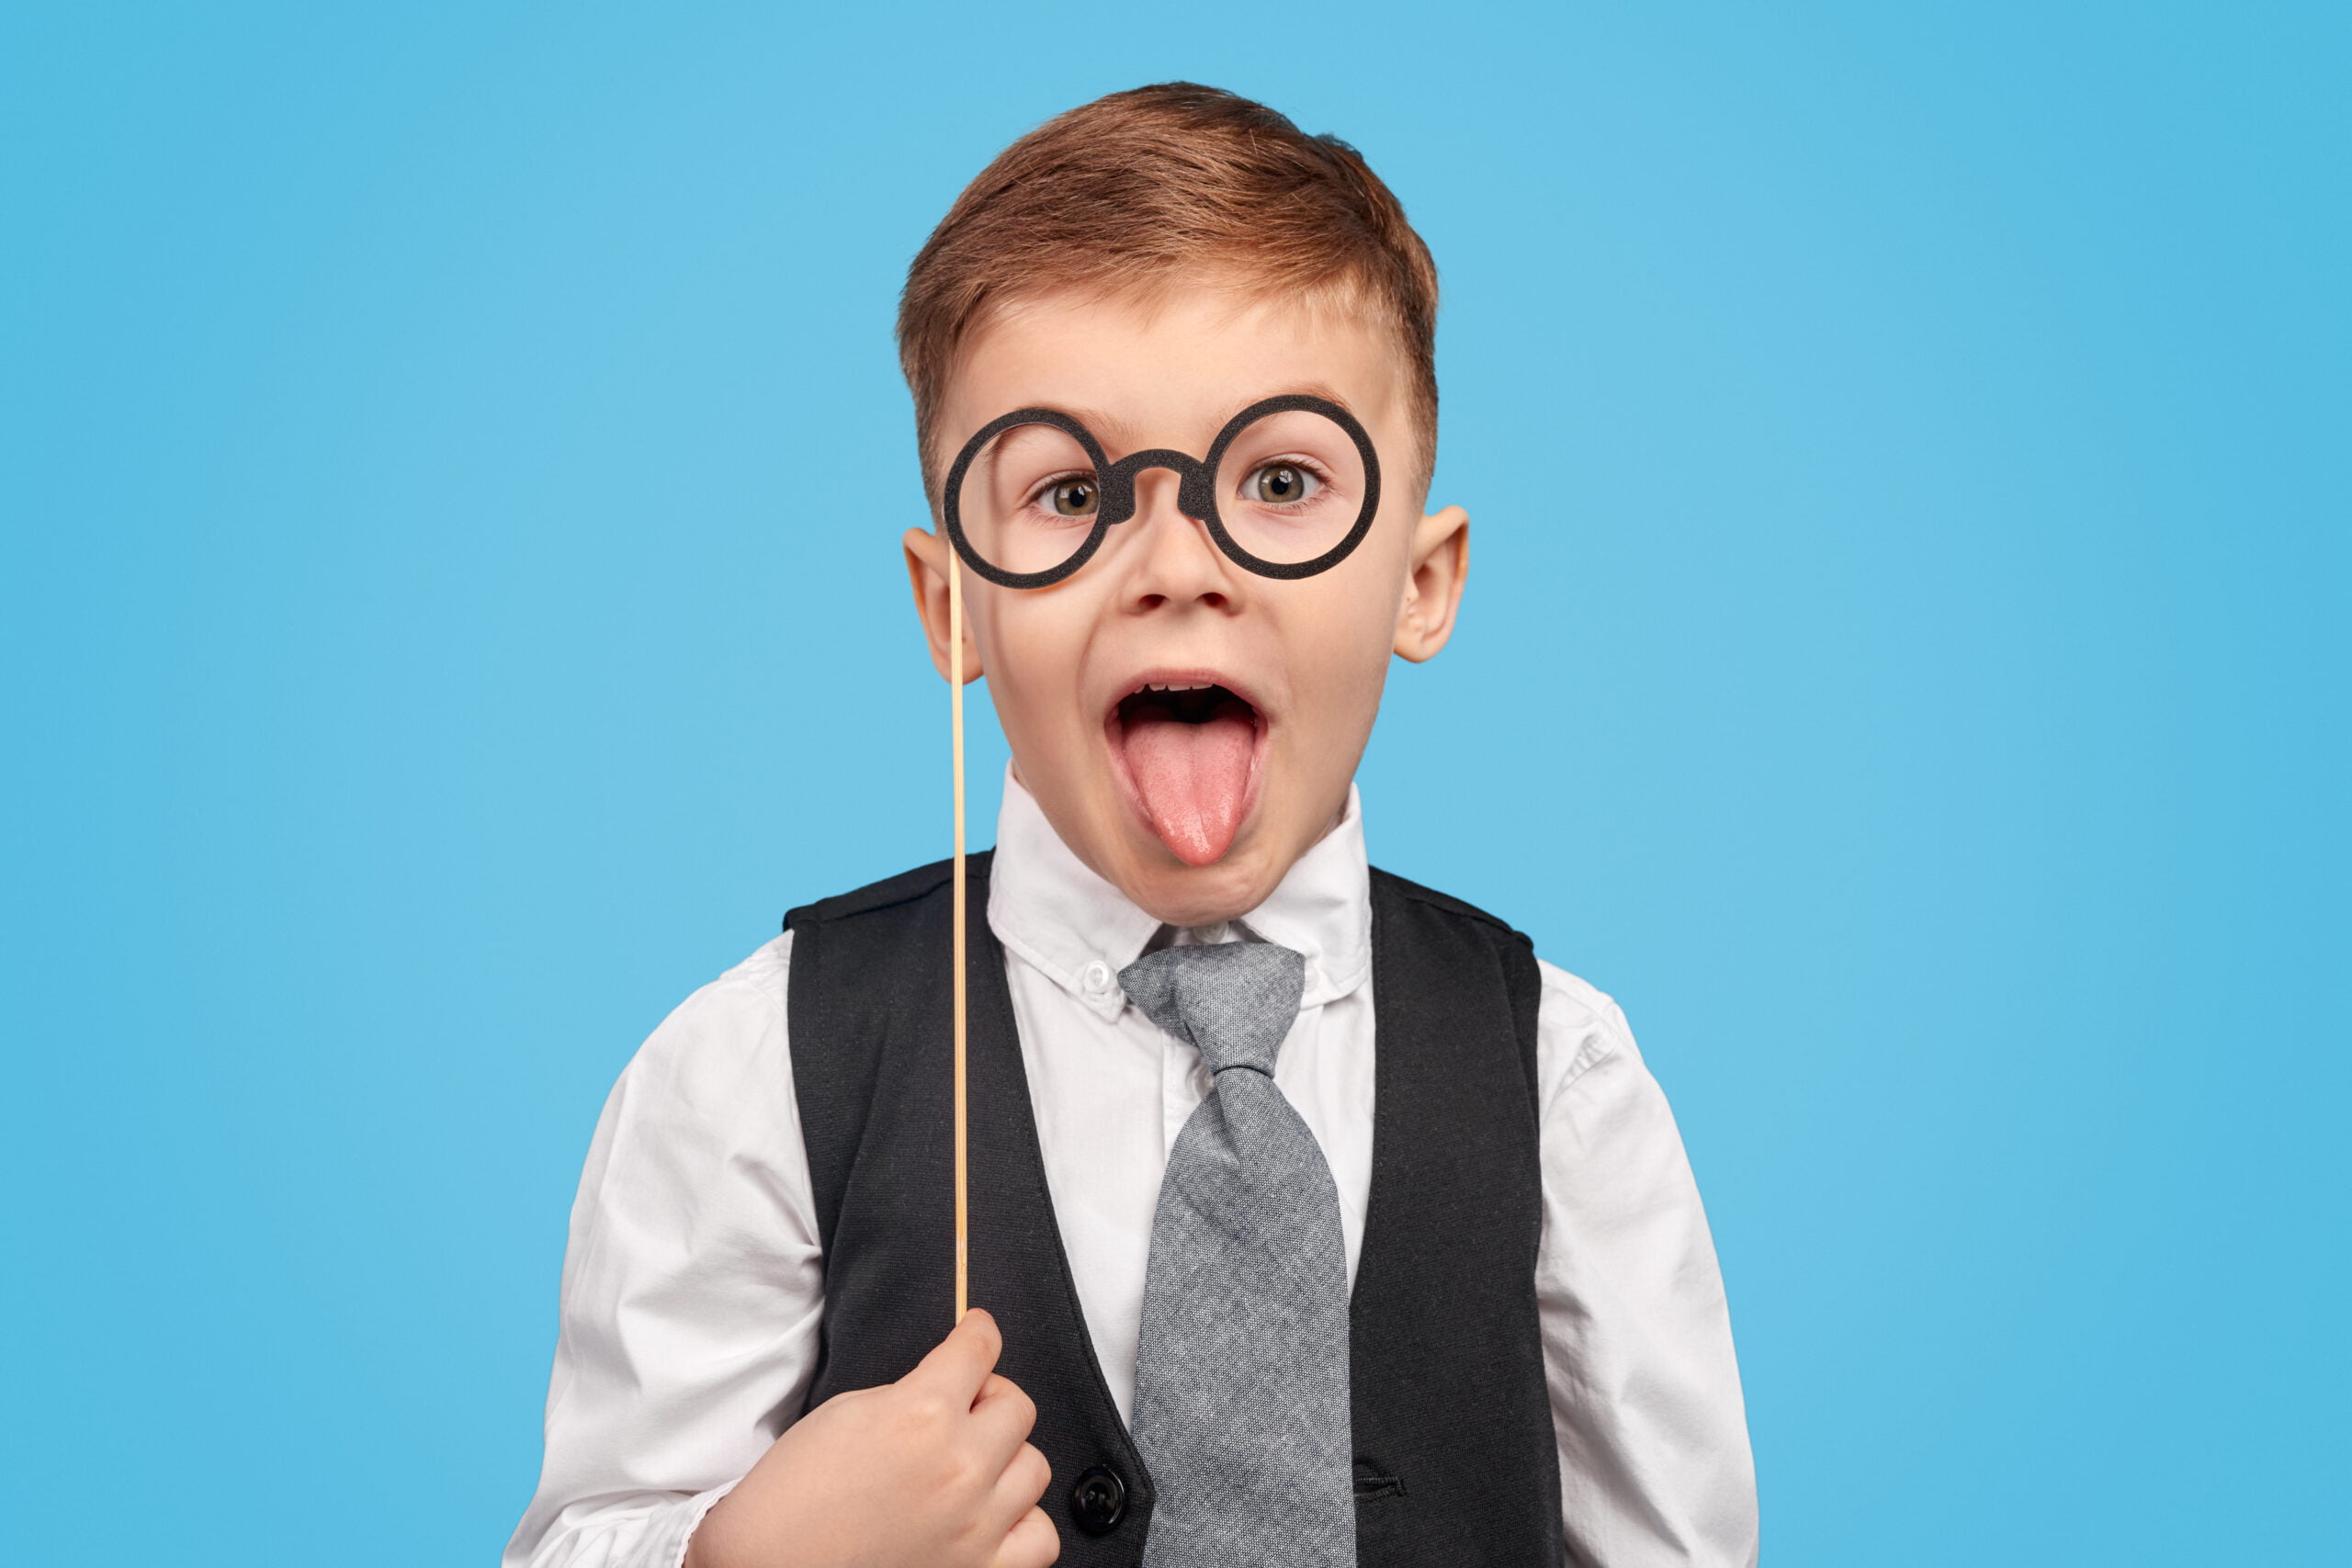 Smart kid in suit holding fake spectacles on stick and showing tongue to camera against blue background